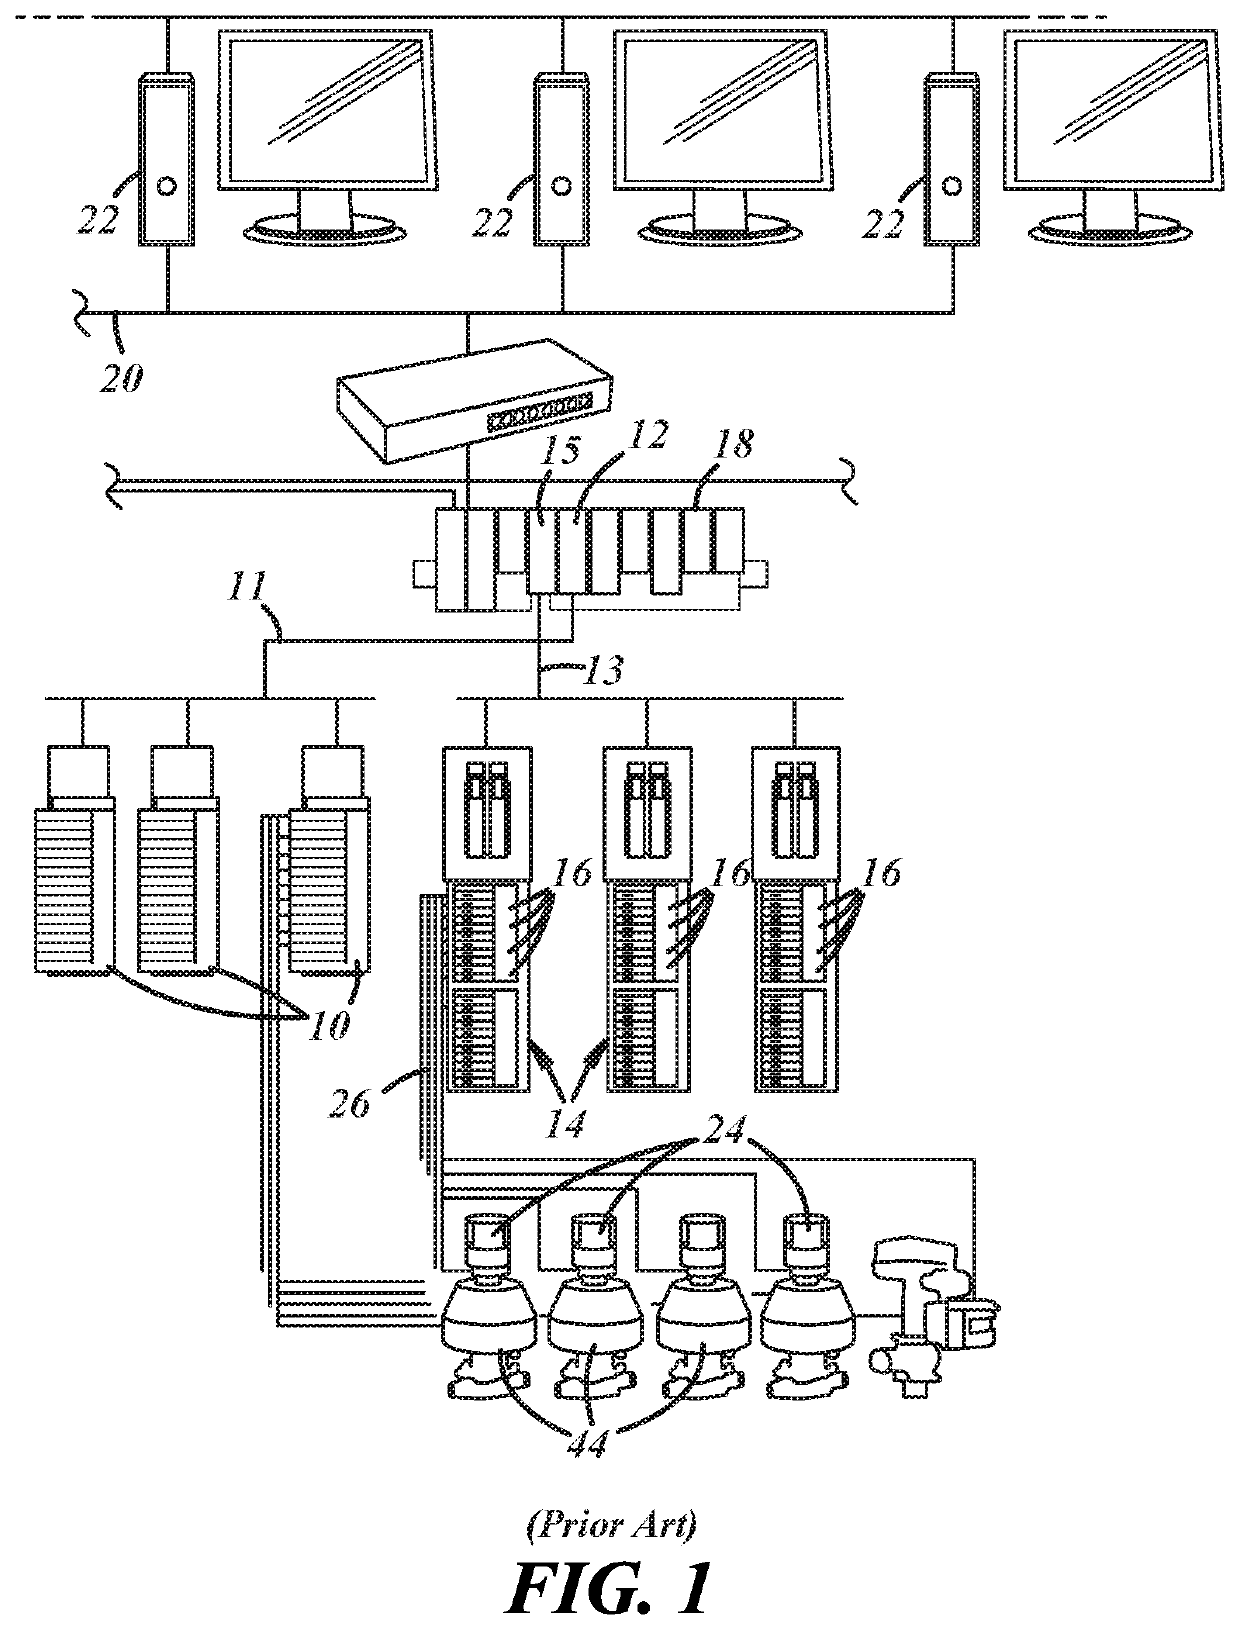 Valve manifold serially mounted to a distributed control system assembly